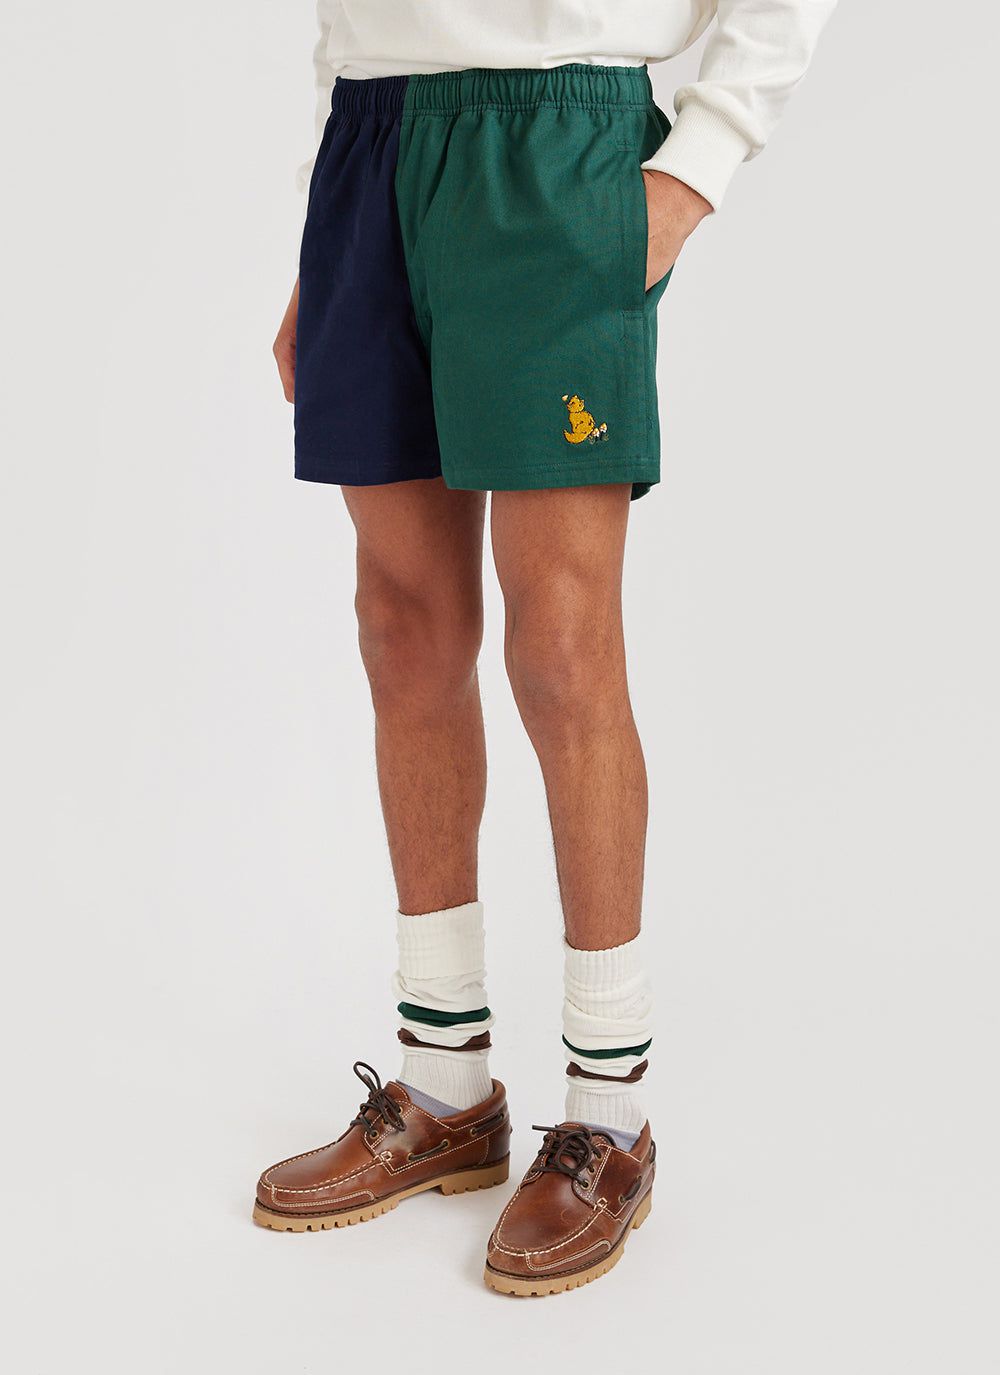 Rugby Shorts Canterbury and Percival Navy with Green Percival Menswear